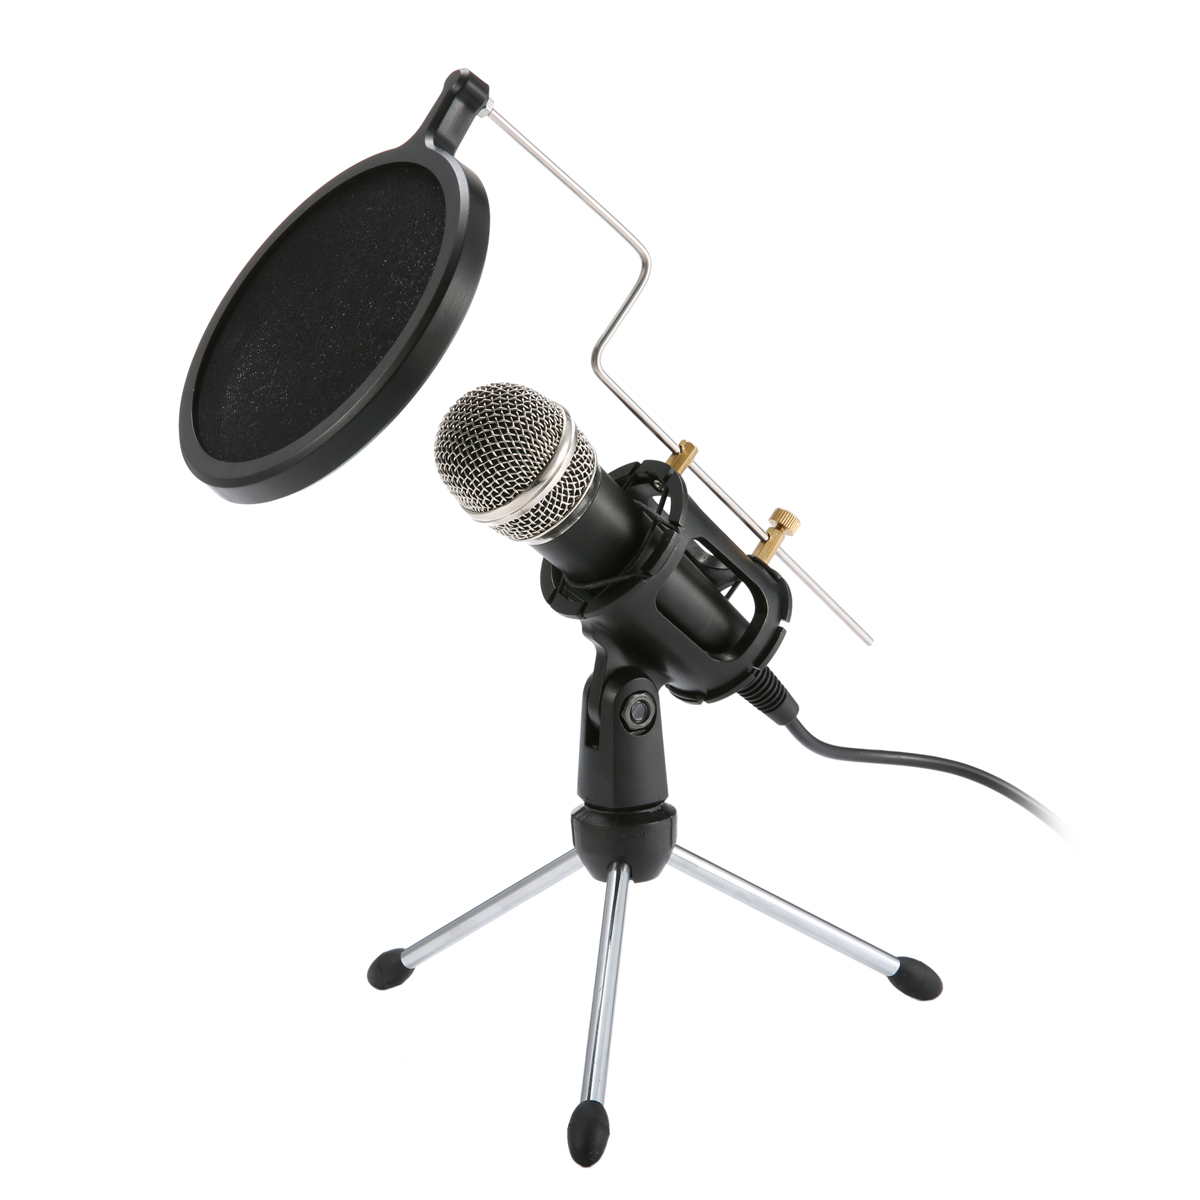 

Professional Condenser Microphone Stereo Mic With Stand for Phone PC Karaoke Recording Podcasting